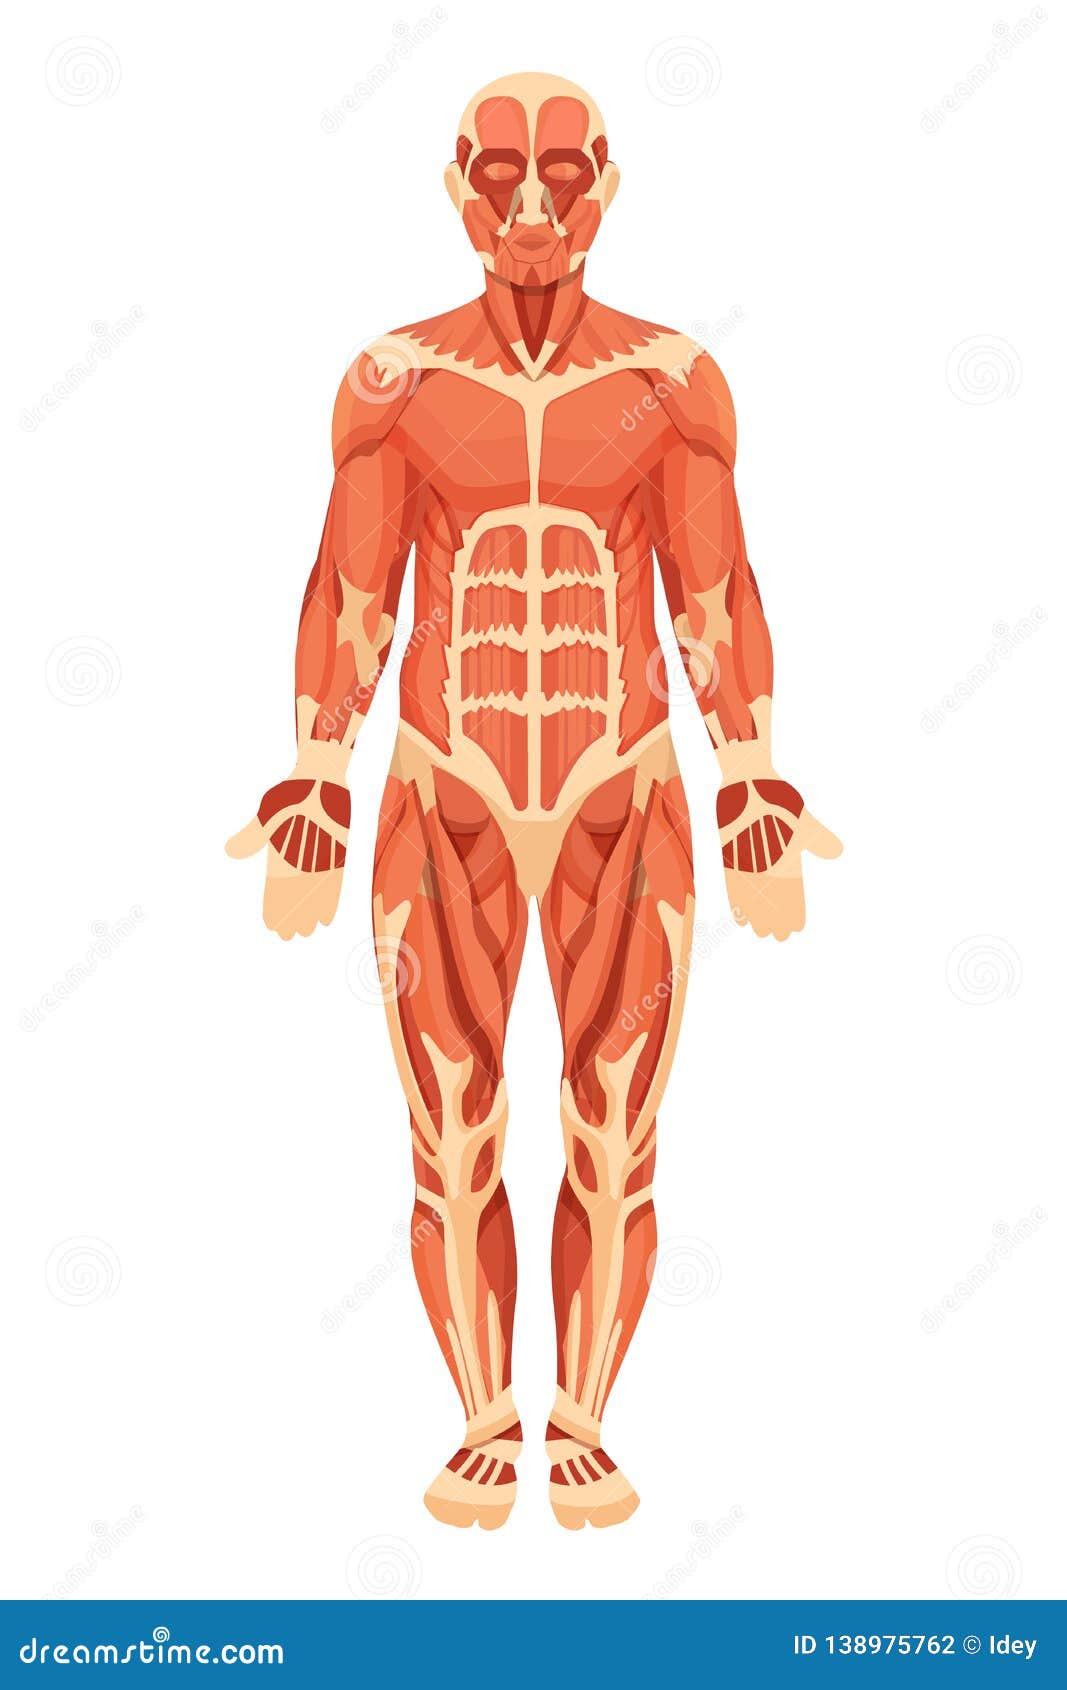 Total Muscles In The Human Body? / Learn Human Body ...